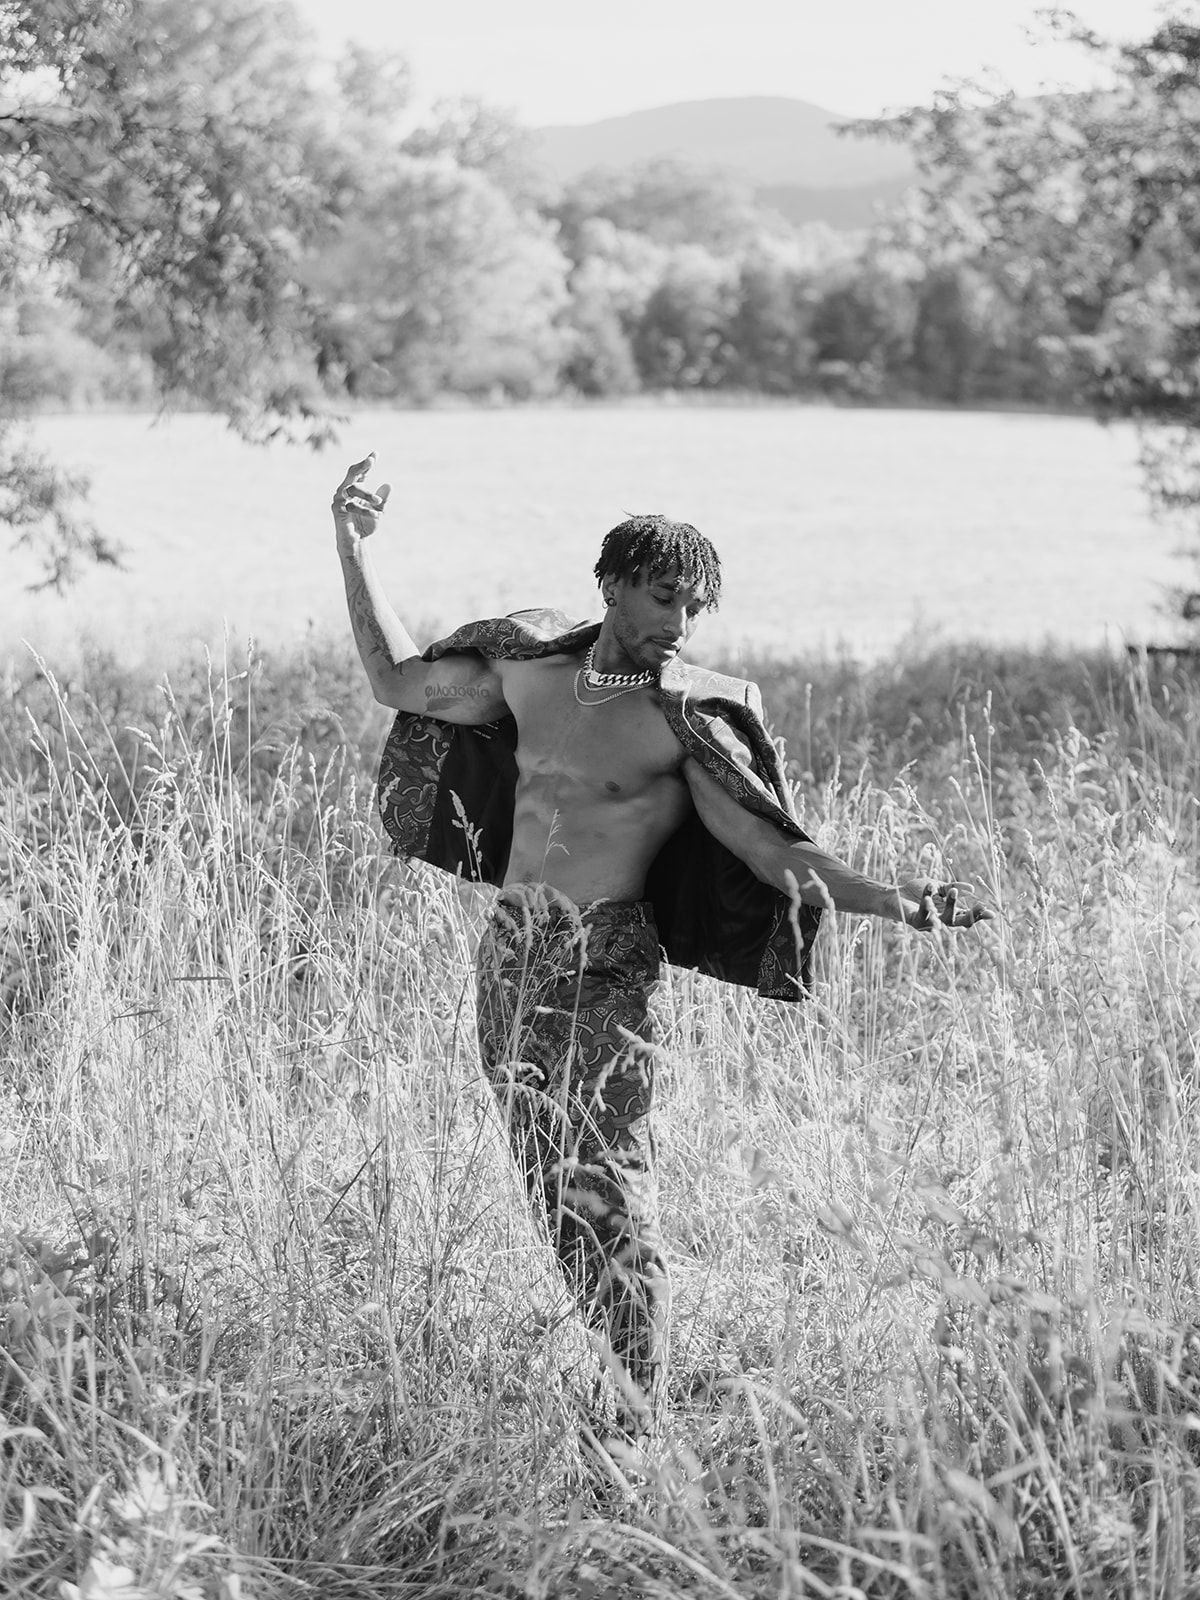 editorial photoshoot featuring a male model in a striking muted floral suit, baring his fit physique amidst nature's can